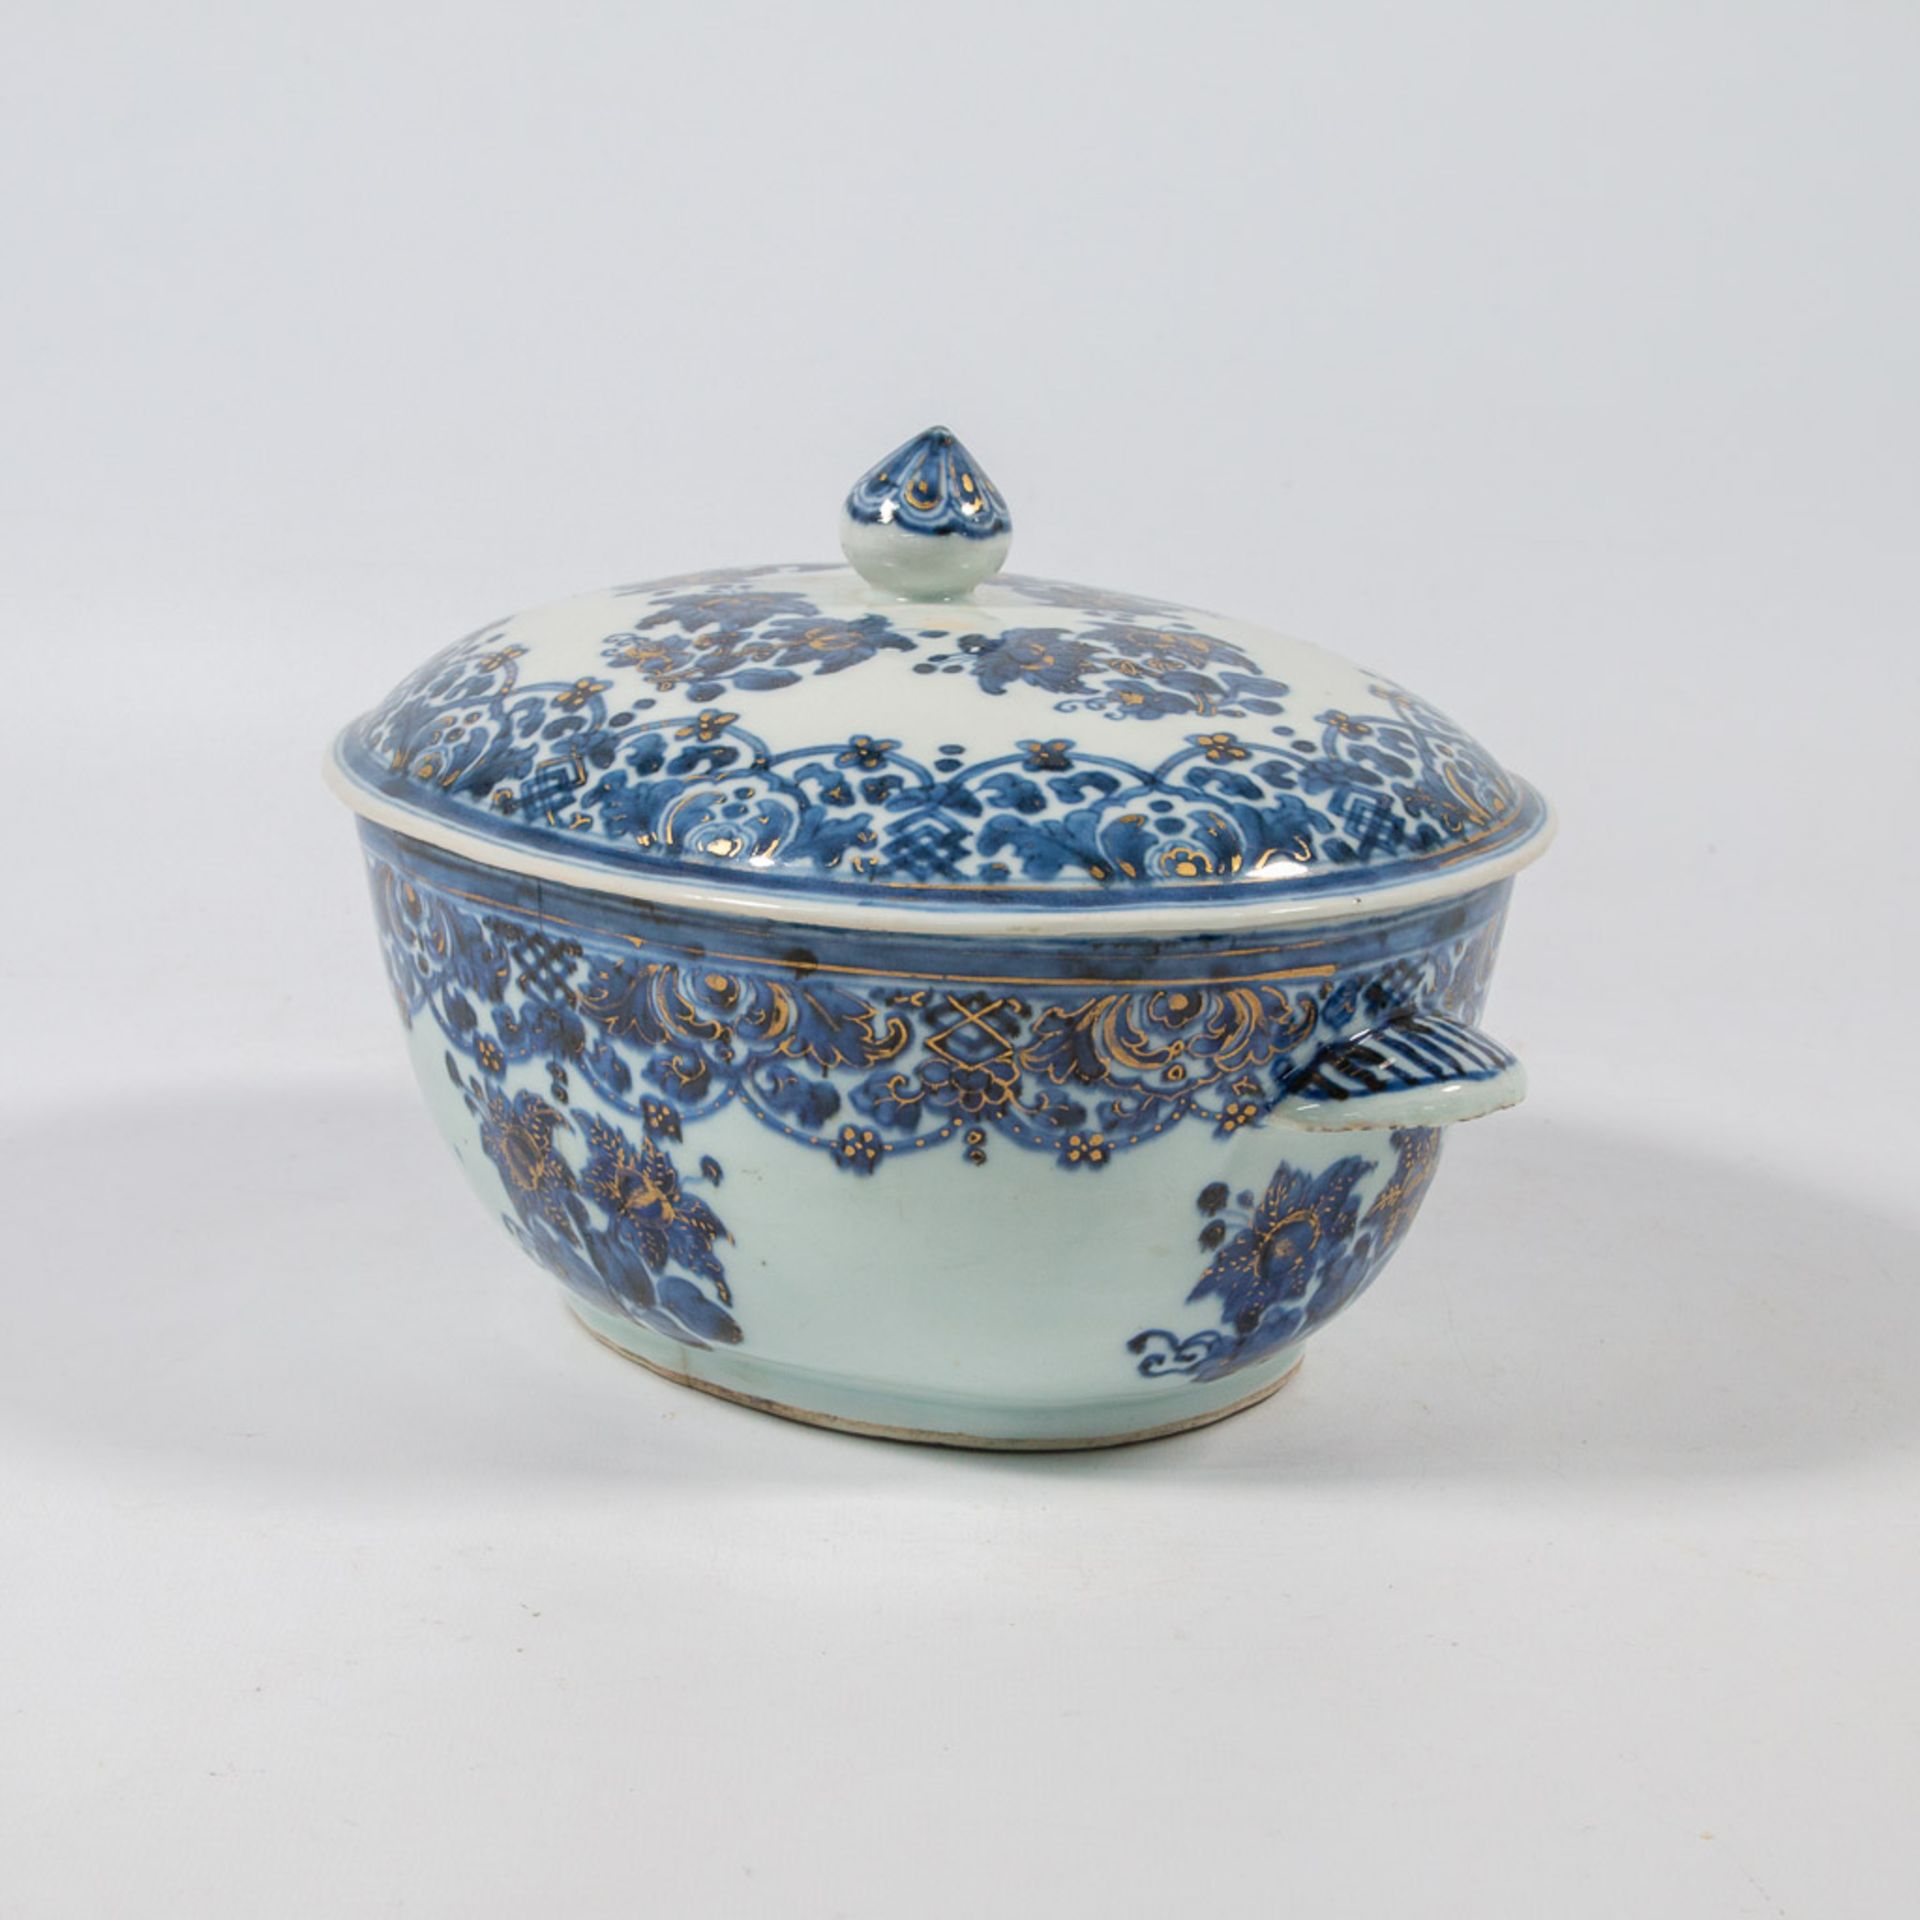 A small tureen with lid, Chinese export porcelain with underglaze blue, white and overglaze gold flo - Image 12 of 24